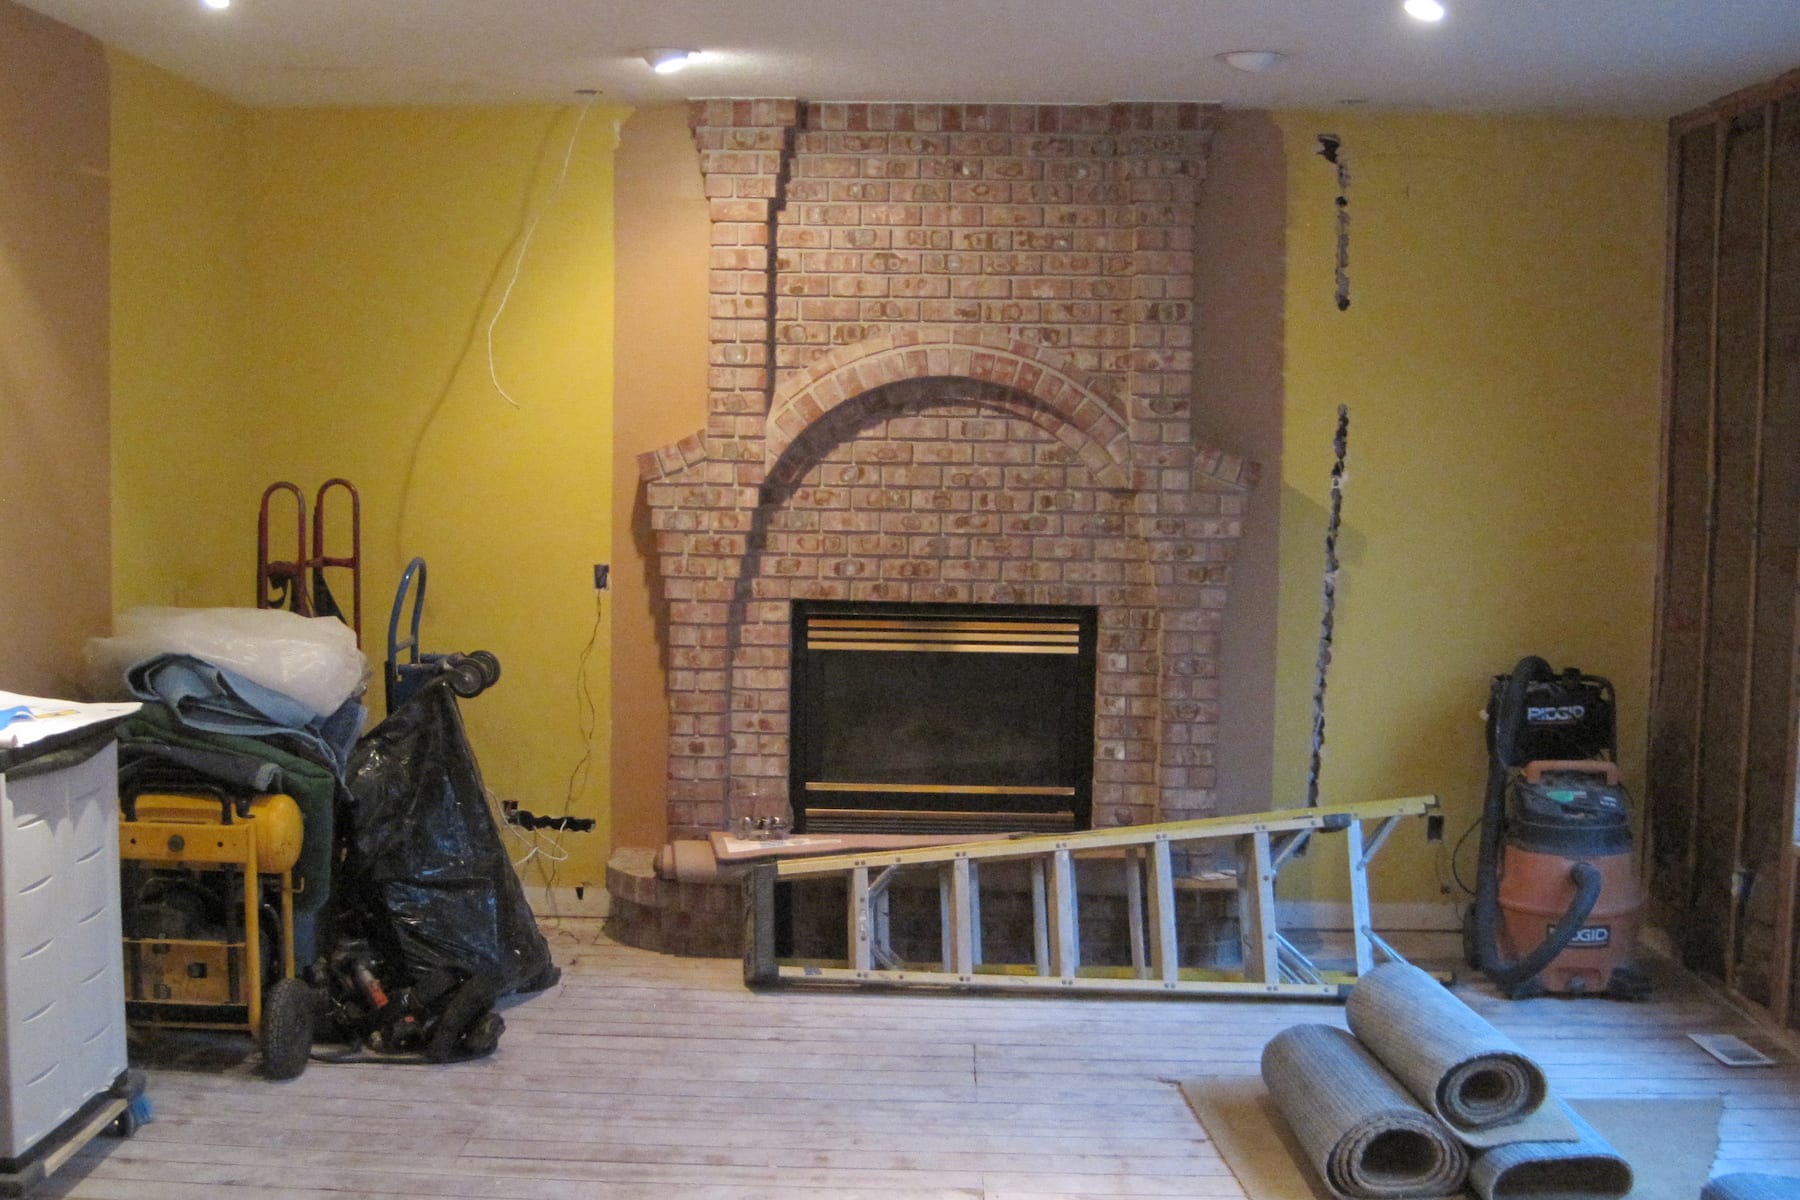 An old fireplace is under construction and being prepped for a remodel